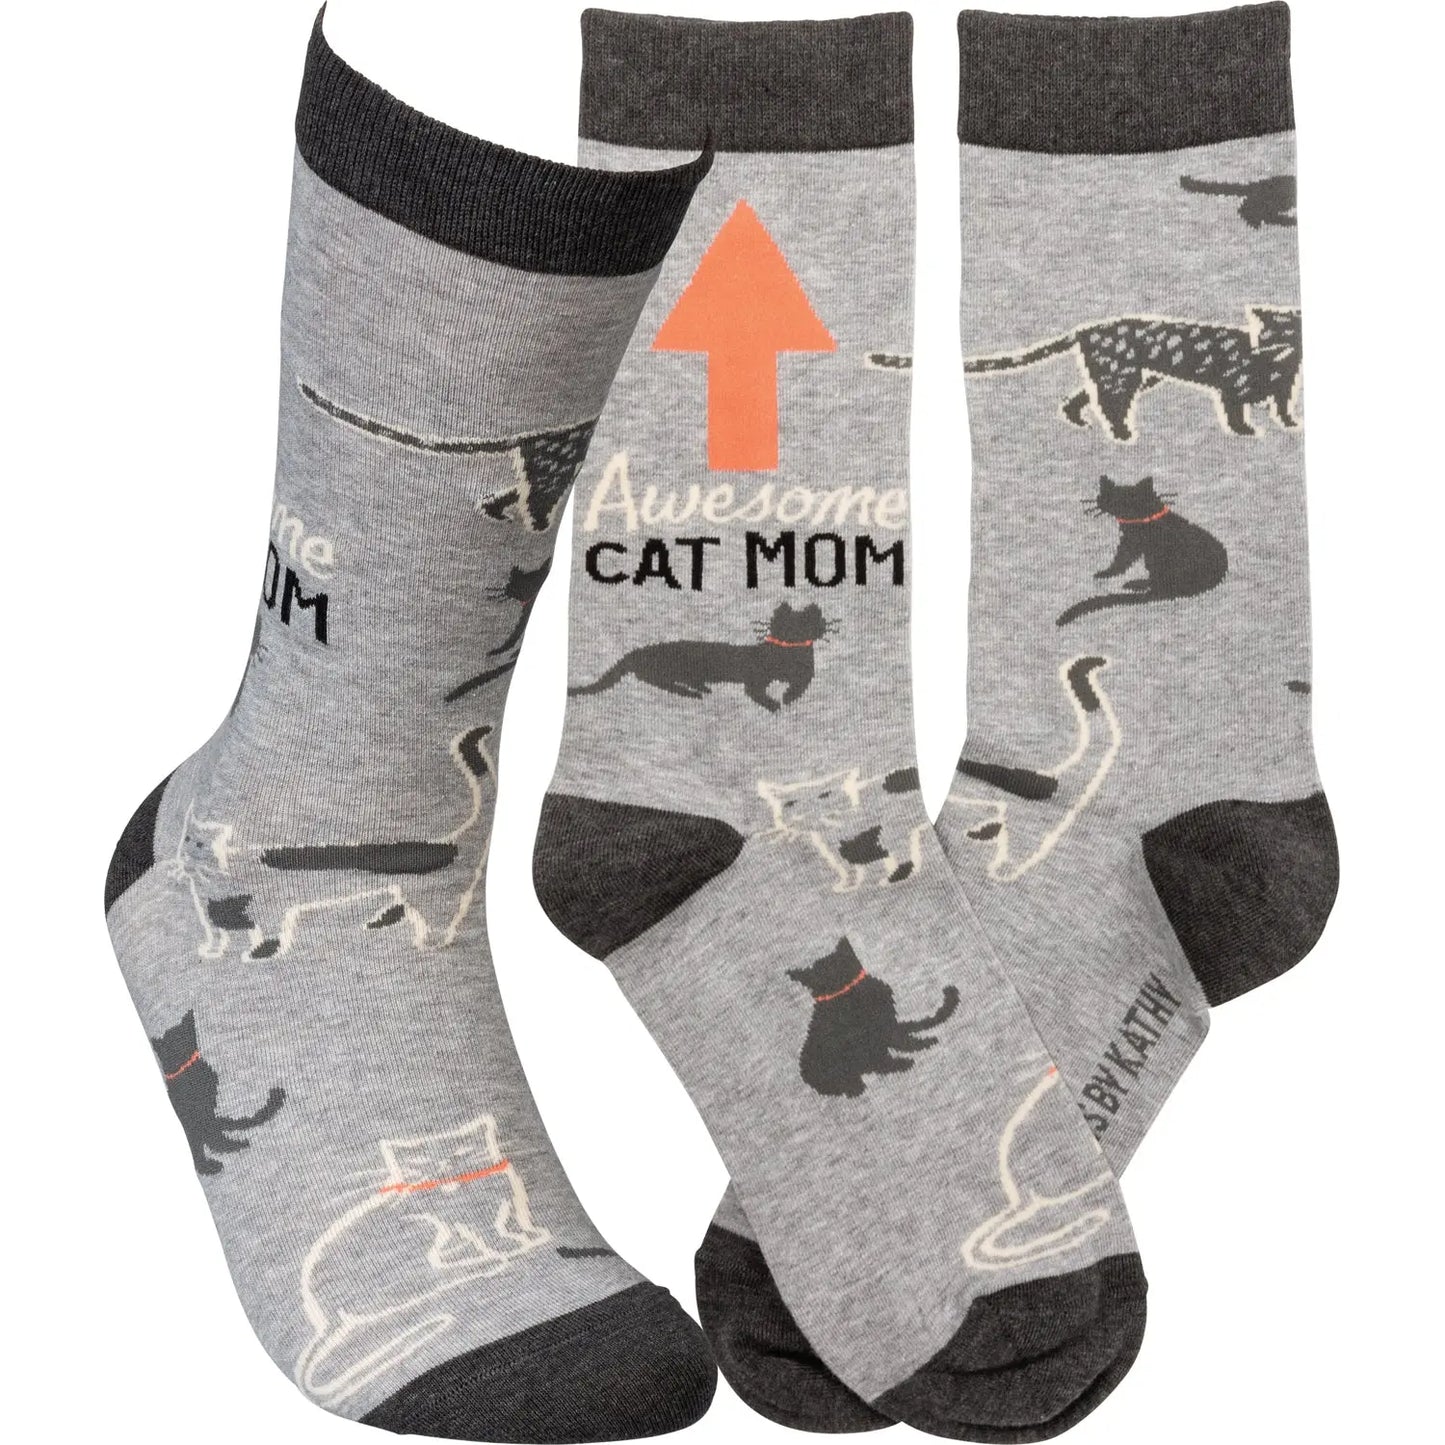 Primatives By Kathy Awesome Cat Mom Socks PRIMITIVES BY KATHY